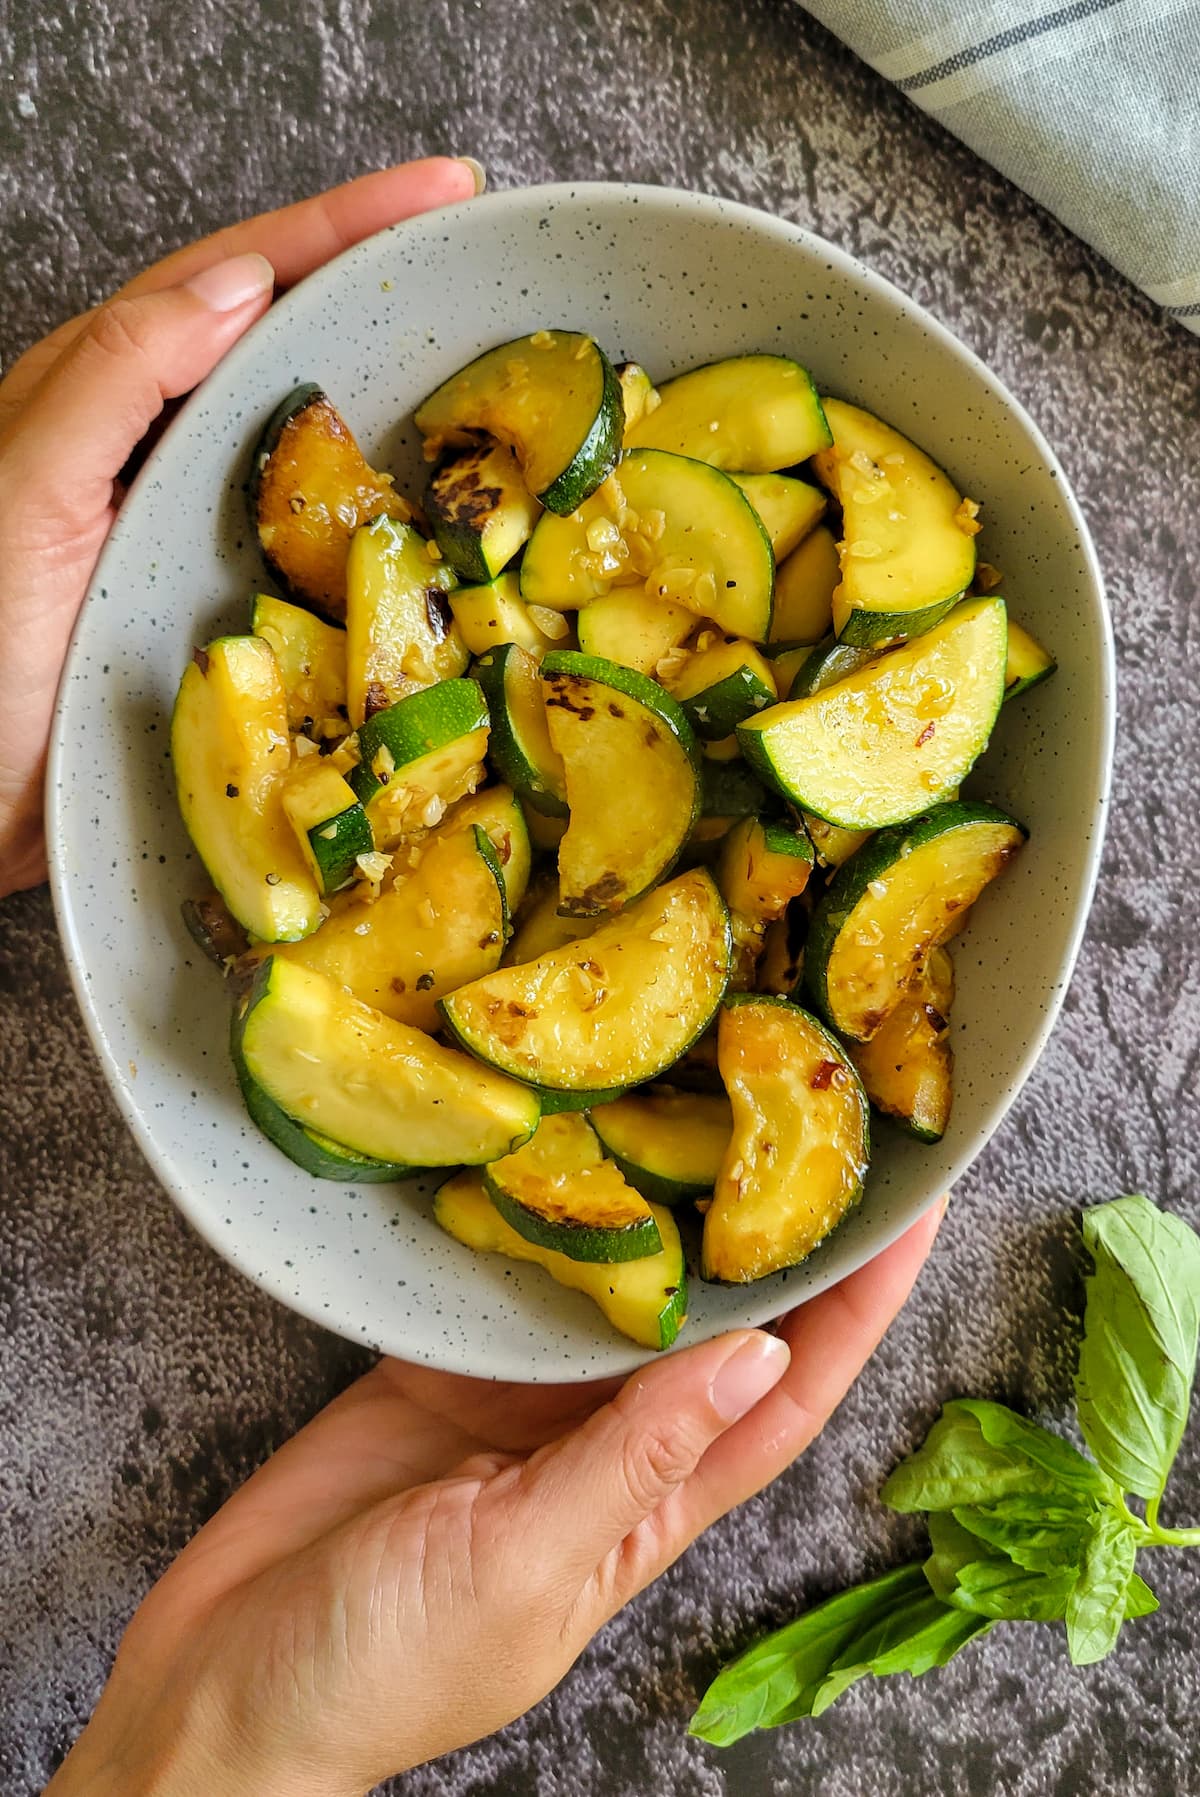 hands holding a bowl of sauteed zucchini with garlic, sprig of fresh basil on the side